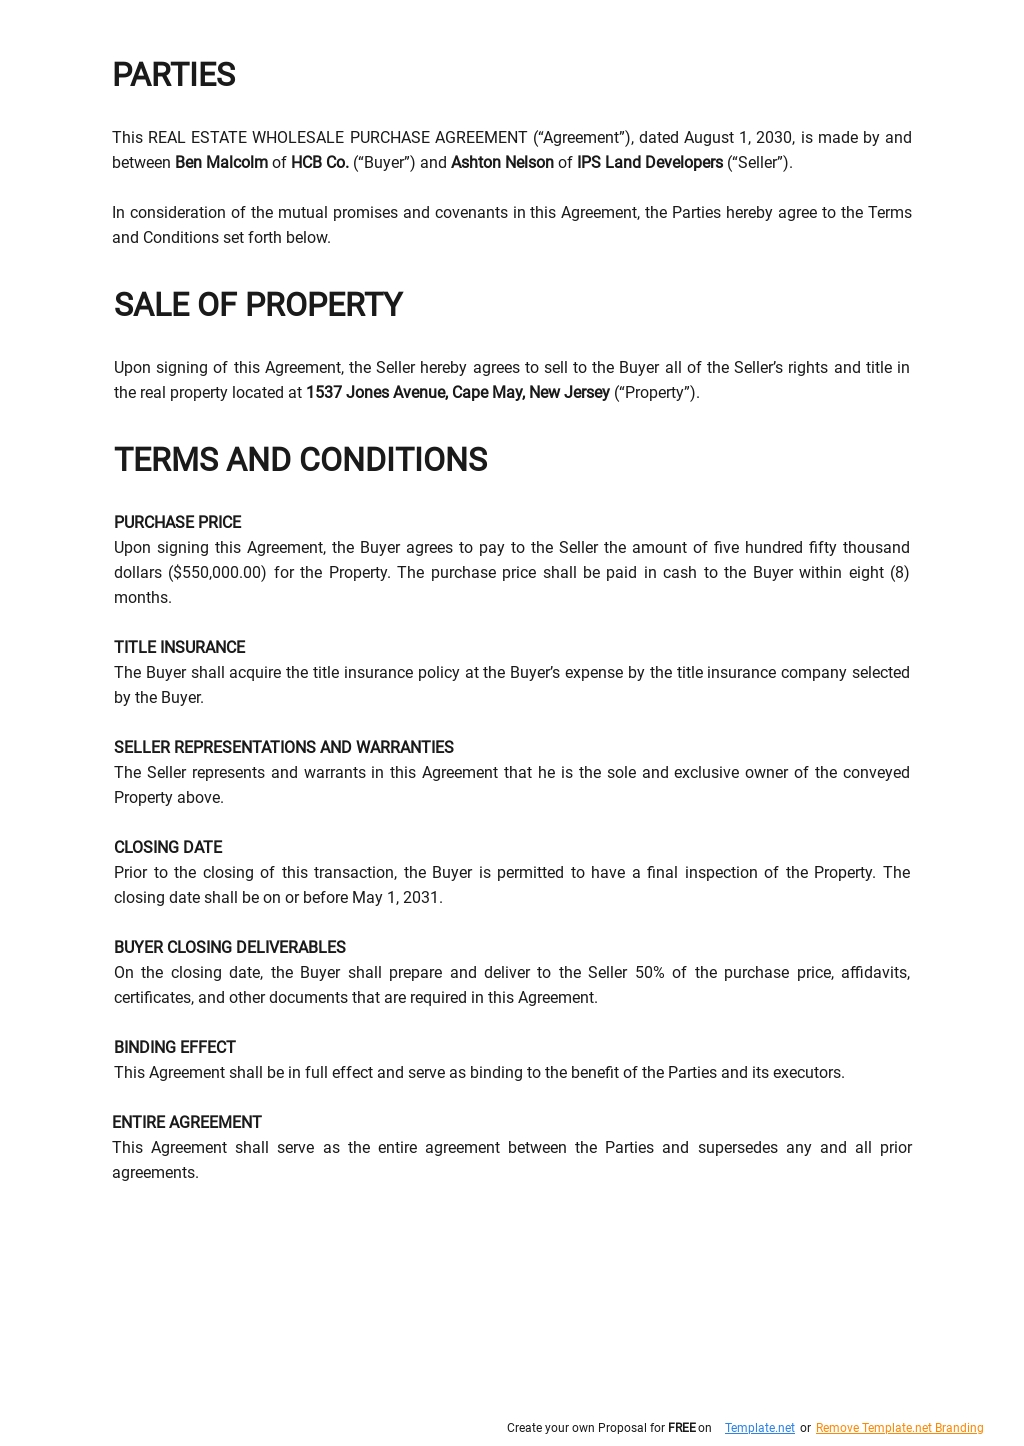 Real Estate Wholesale Purchase Agreement Template 1.jpe